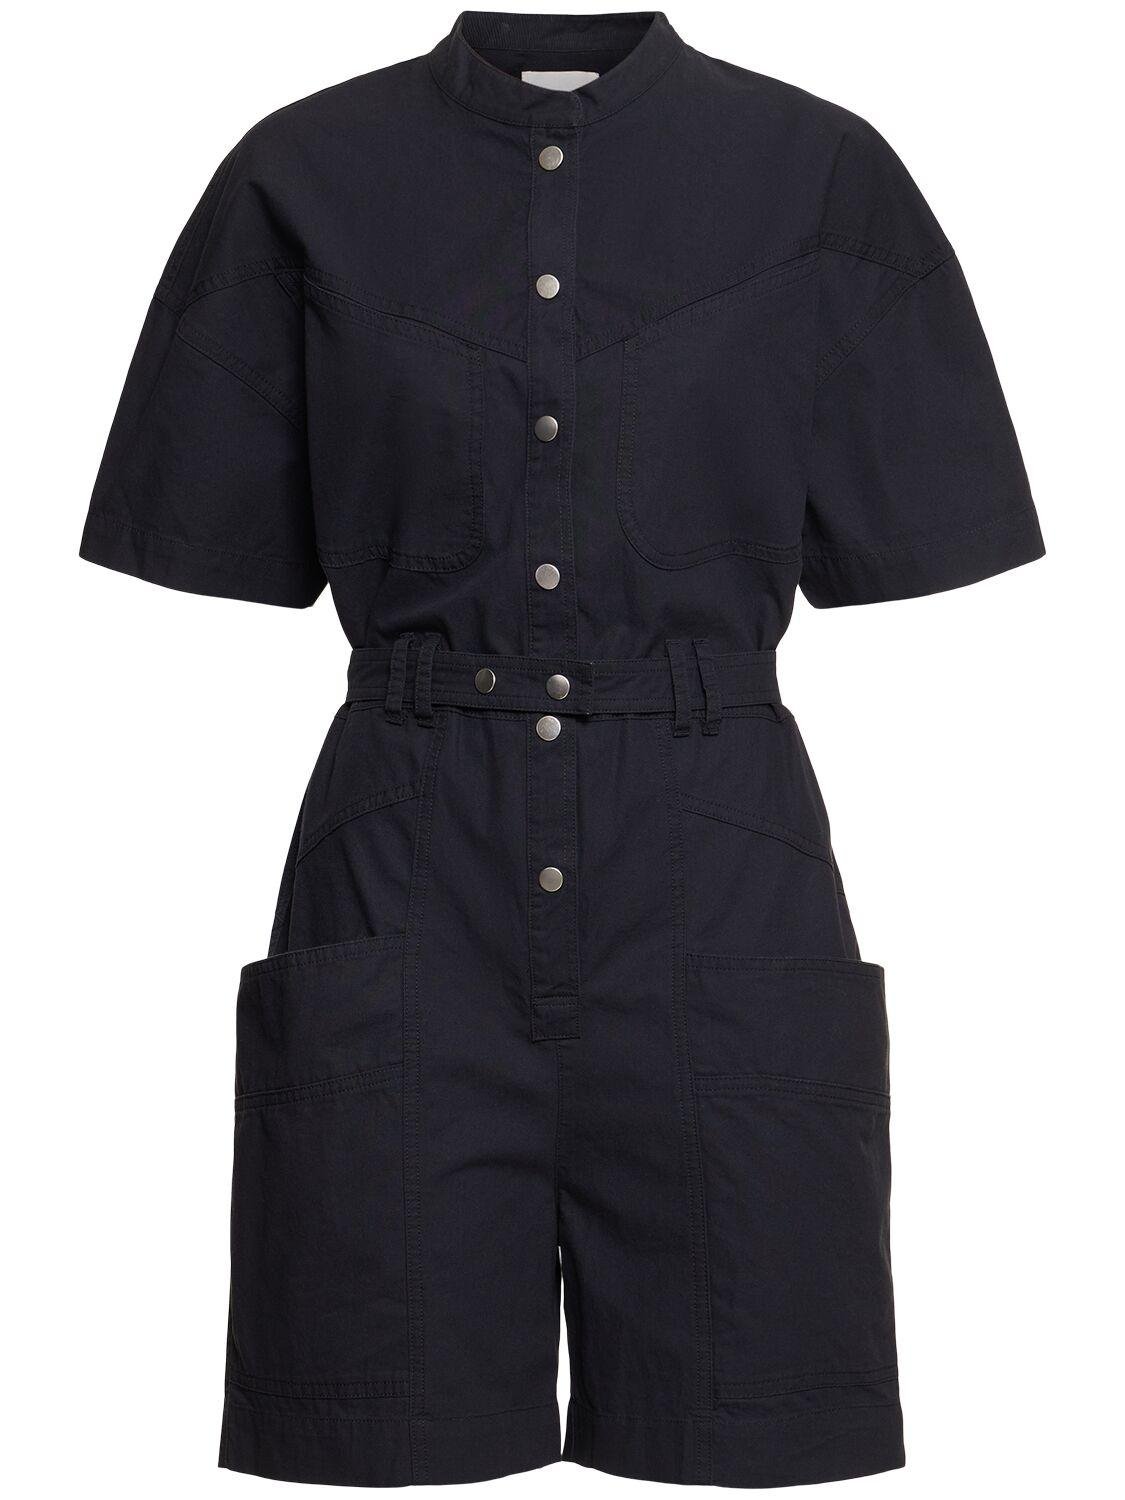 Kiara Belted Cotton Overalls by MARANT ETOILE